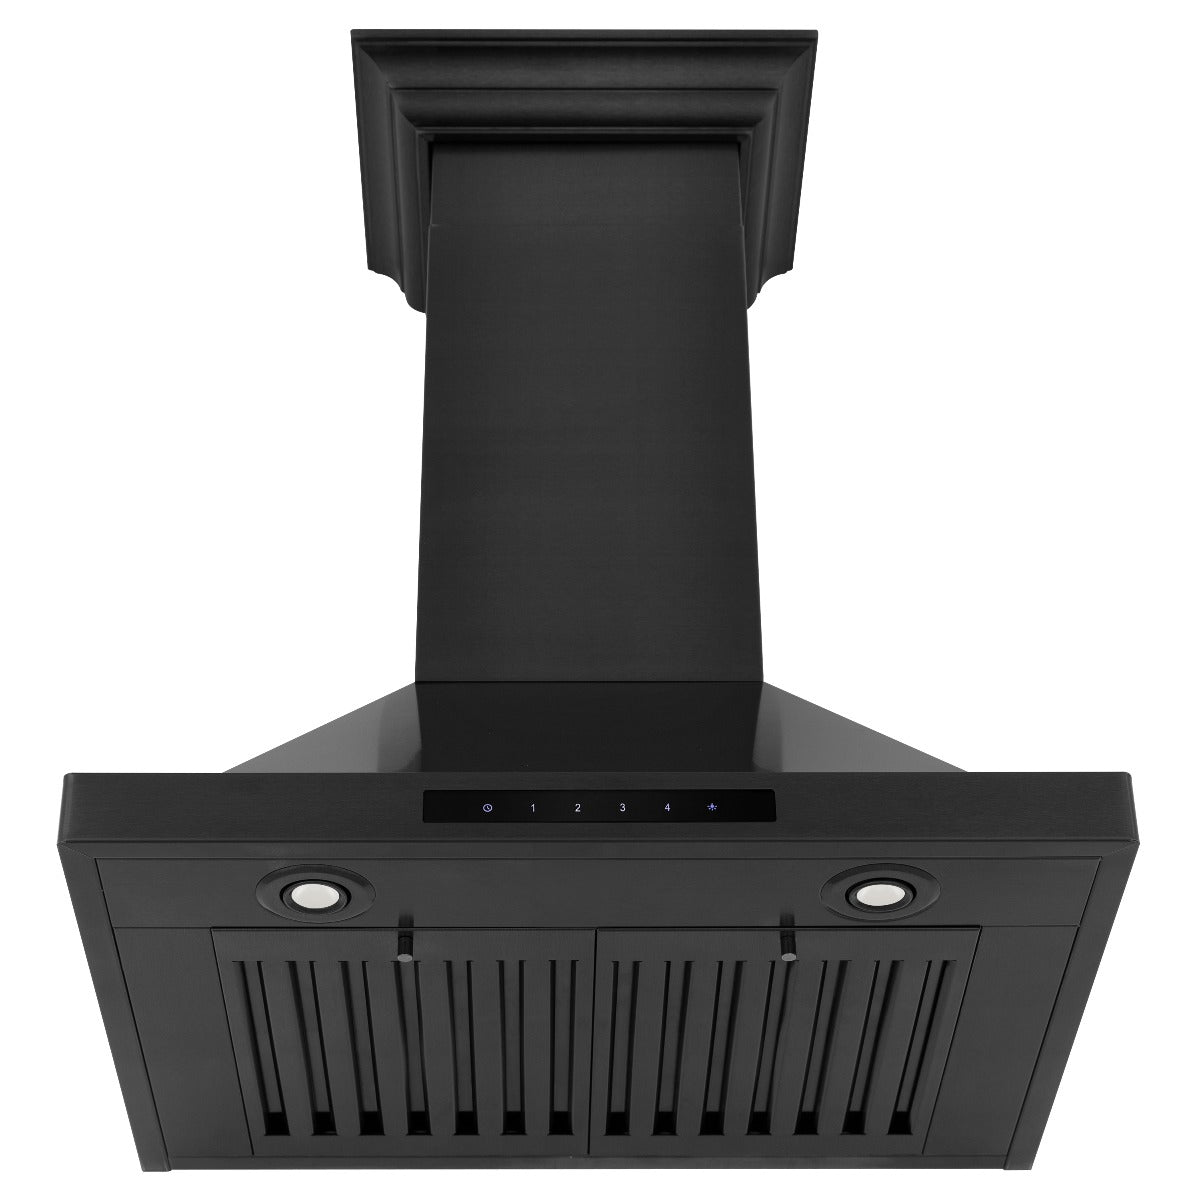 ZLINE 24 in. Convertible Vent Wall Mount Range Hood in Black Stainless Steel with Crown Molding, BSKBNCRN-24 - Smart Kitchen Lab